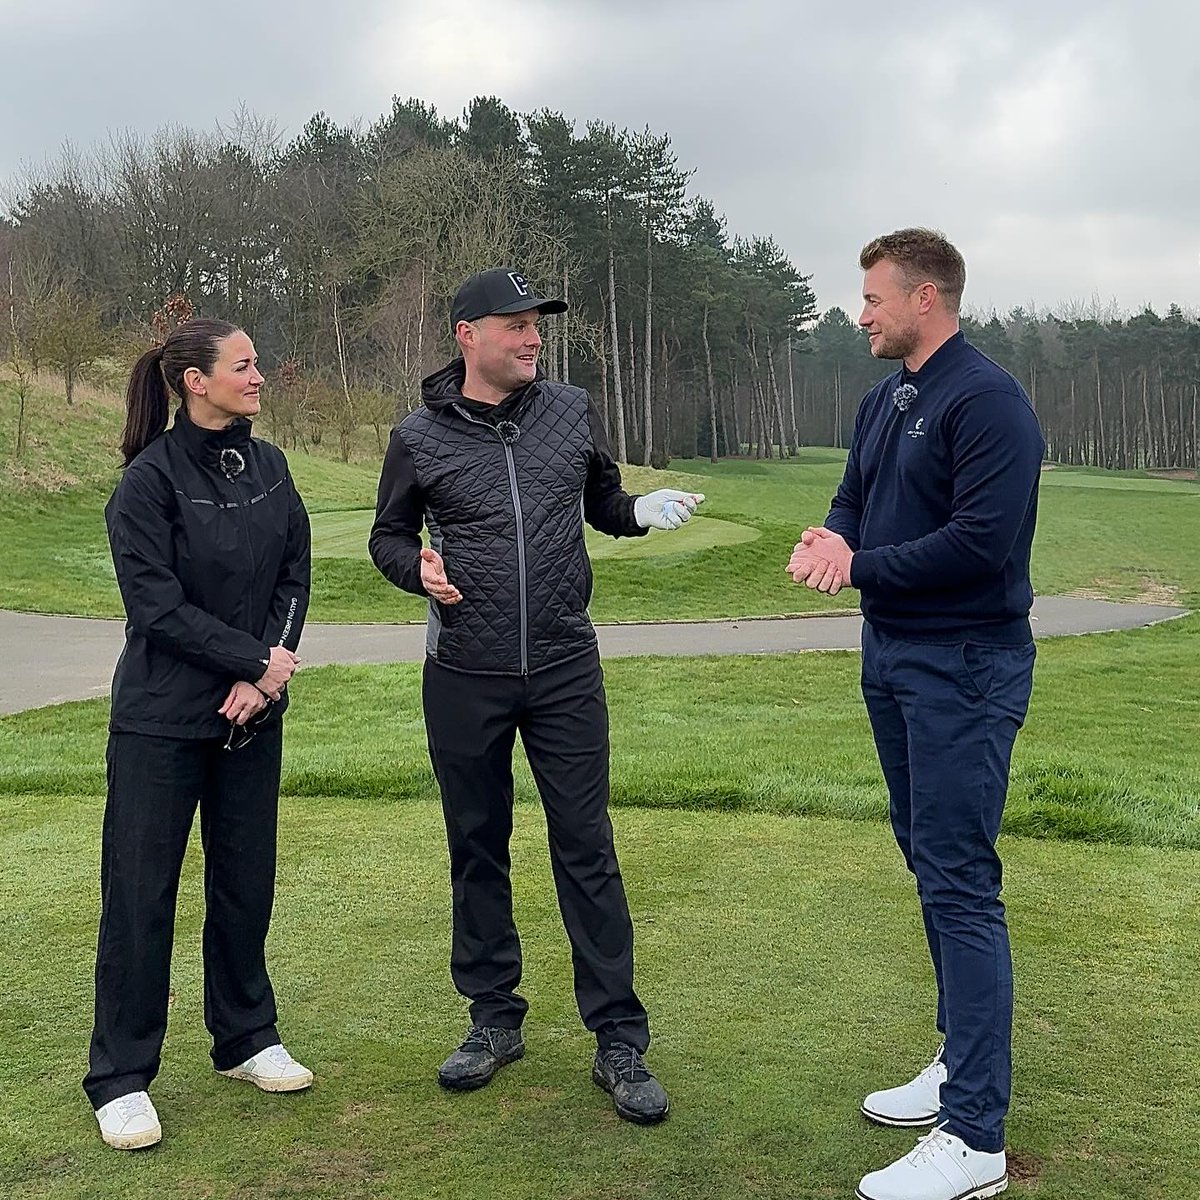 A real pleasure to have hosted the amazing Tubes Golf Life and Kirsty Gallacher and our ambassador Oli Fisher ⛳️ Go check out our latest Instagram post for a chance to win a round of golf here at Centurion Club instagram.com/centurionclub/